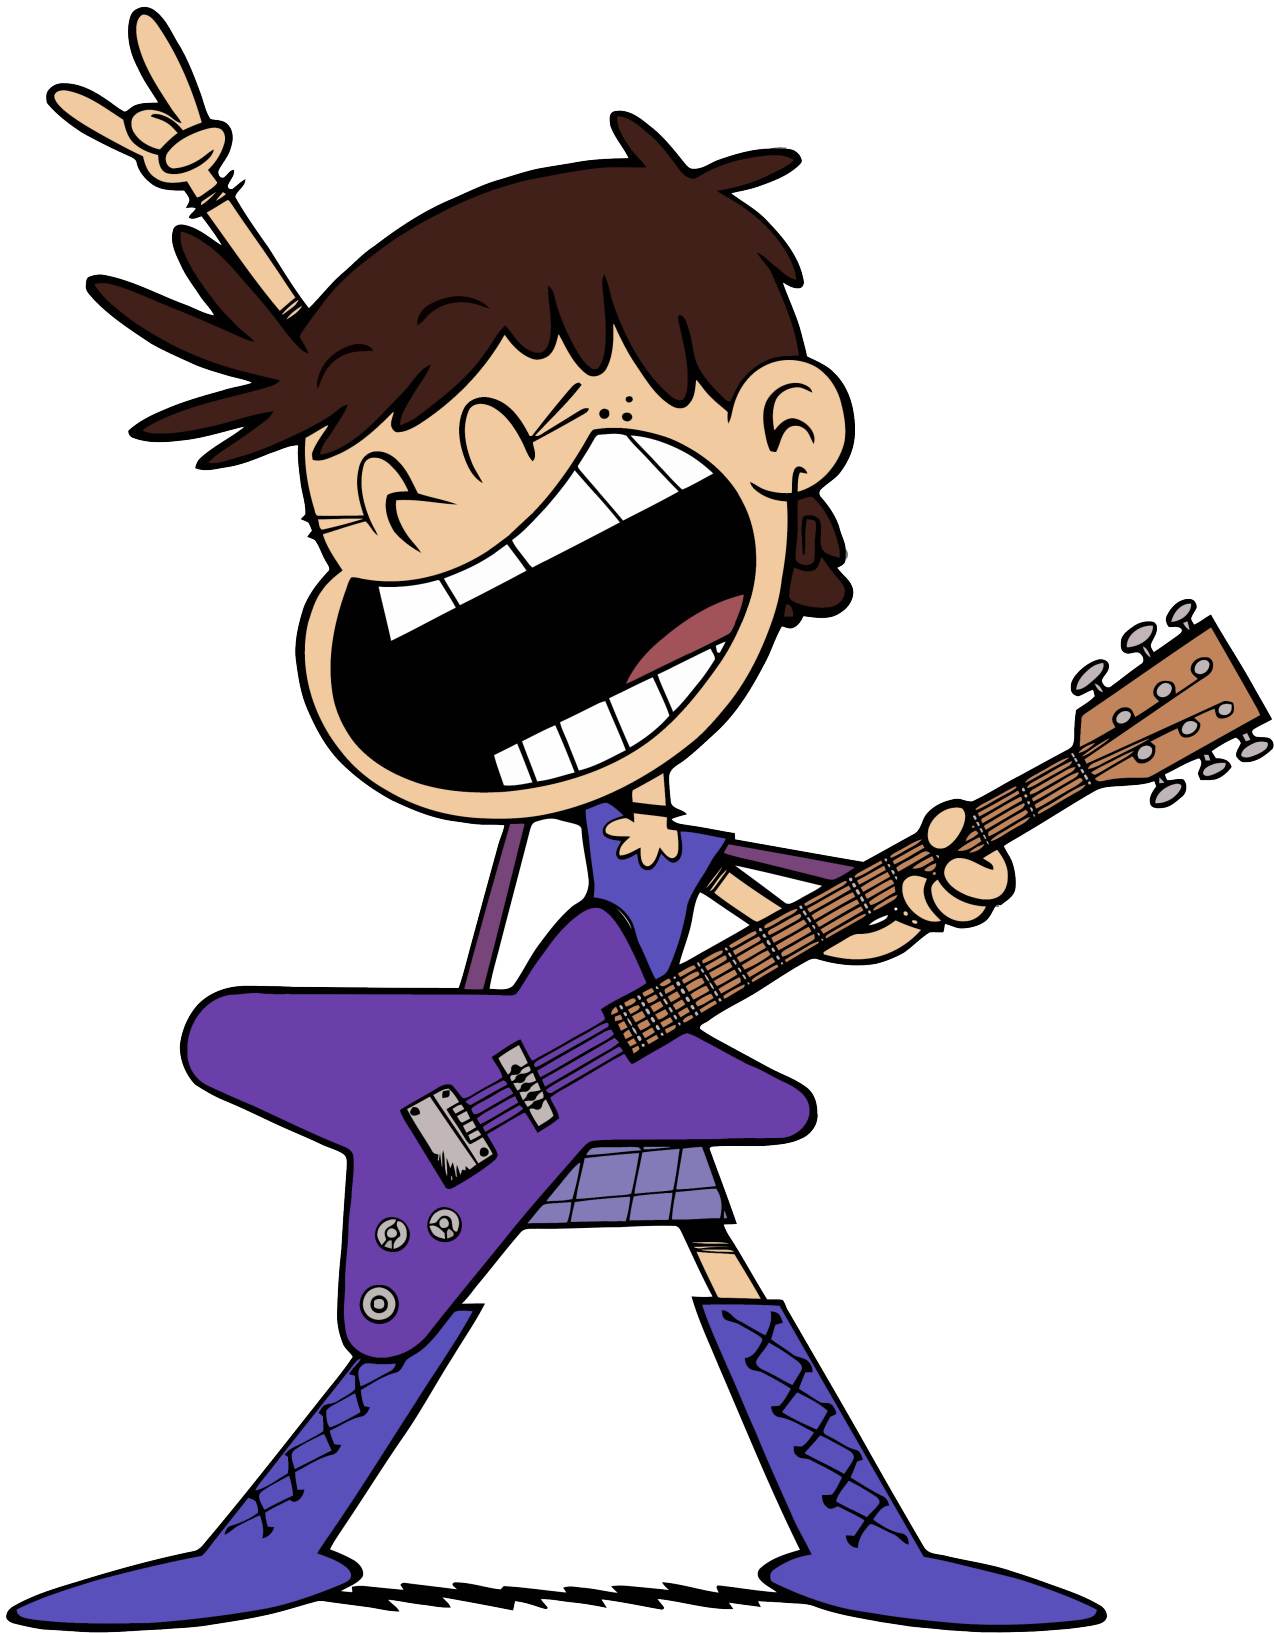 Download and share clipart about More Of Luna Loud Looks Like Im Officially...